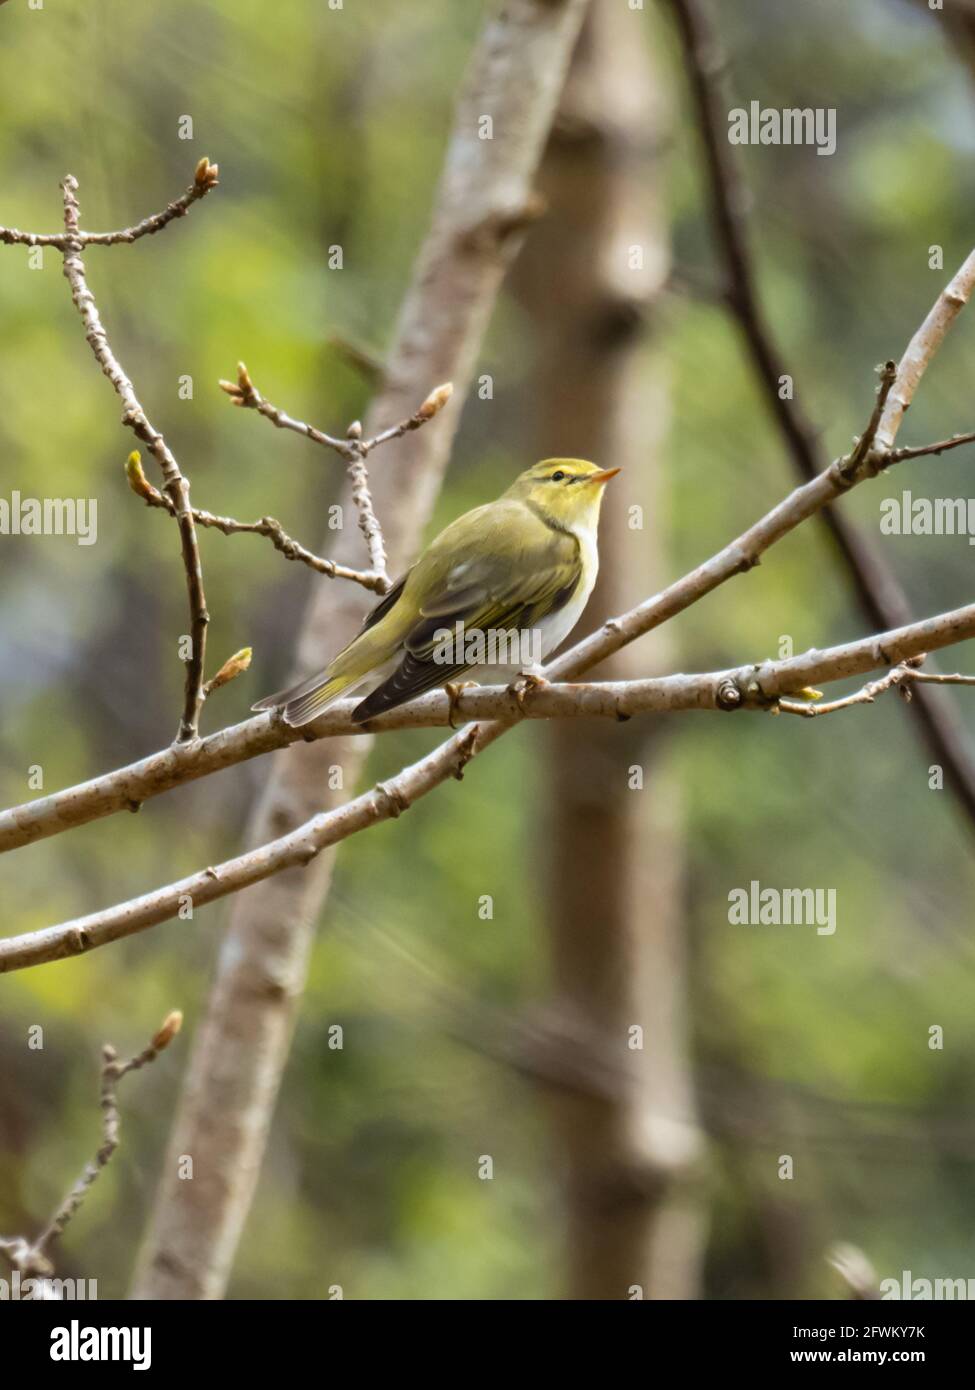 A Wood Warbler (Phylloscopus sibilatrix) perched in a tree. Stock Photo